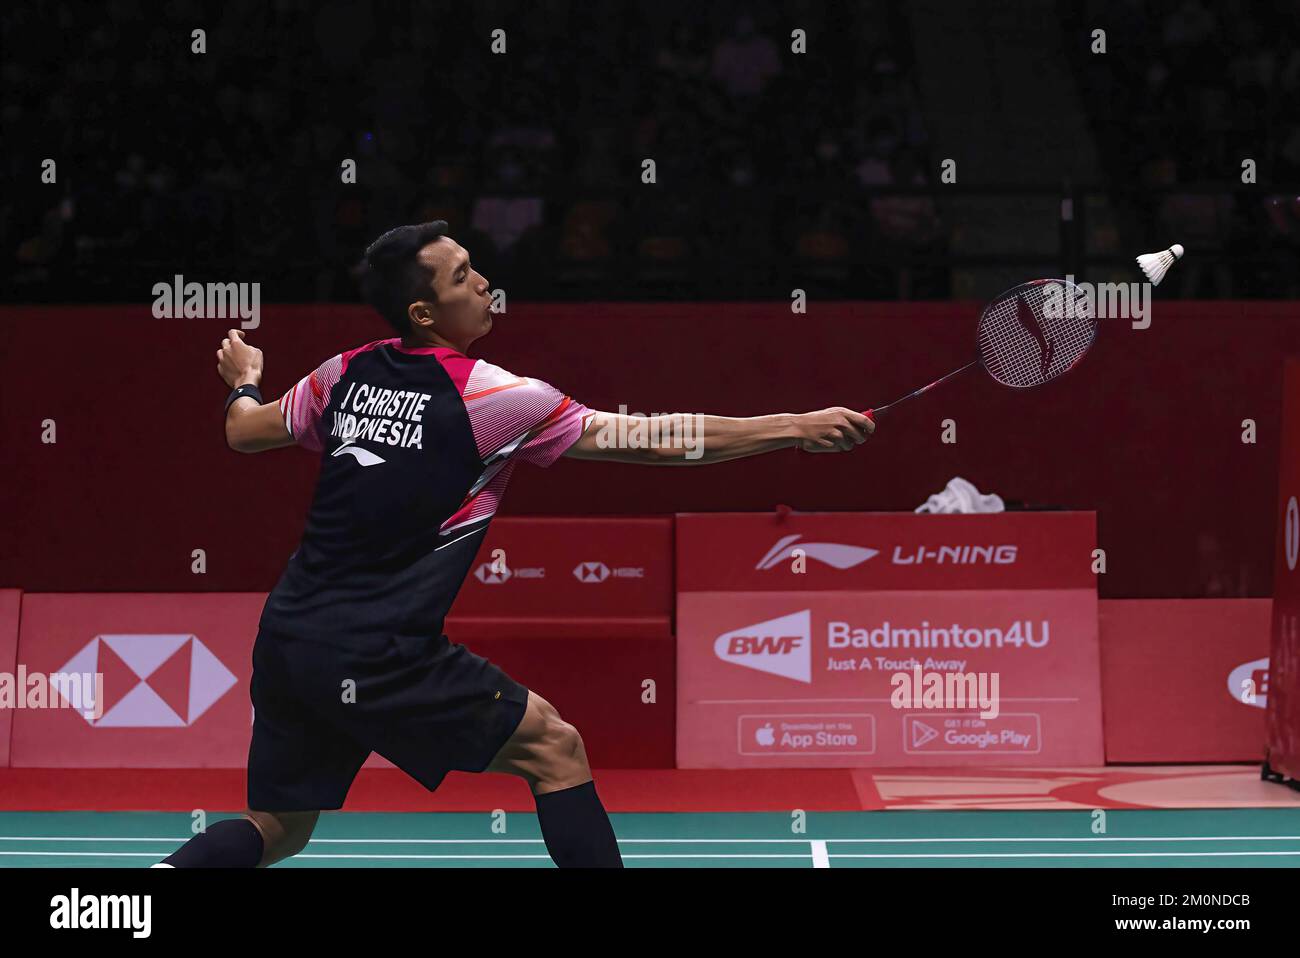 Jonathan Christie of Indonesia seen in action during the Badminton Mens Single in the HSBC BTW World Tour Finals 2022 at Nimibutr Stadium in Bangkok, The result is Jonathan Christie won over